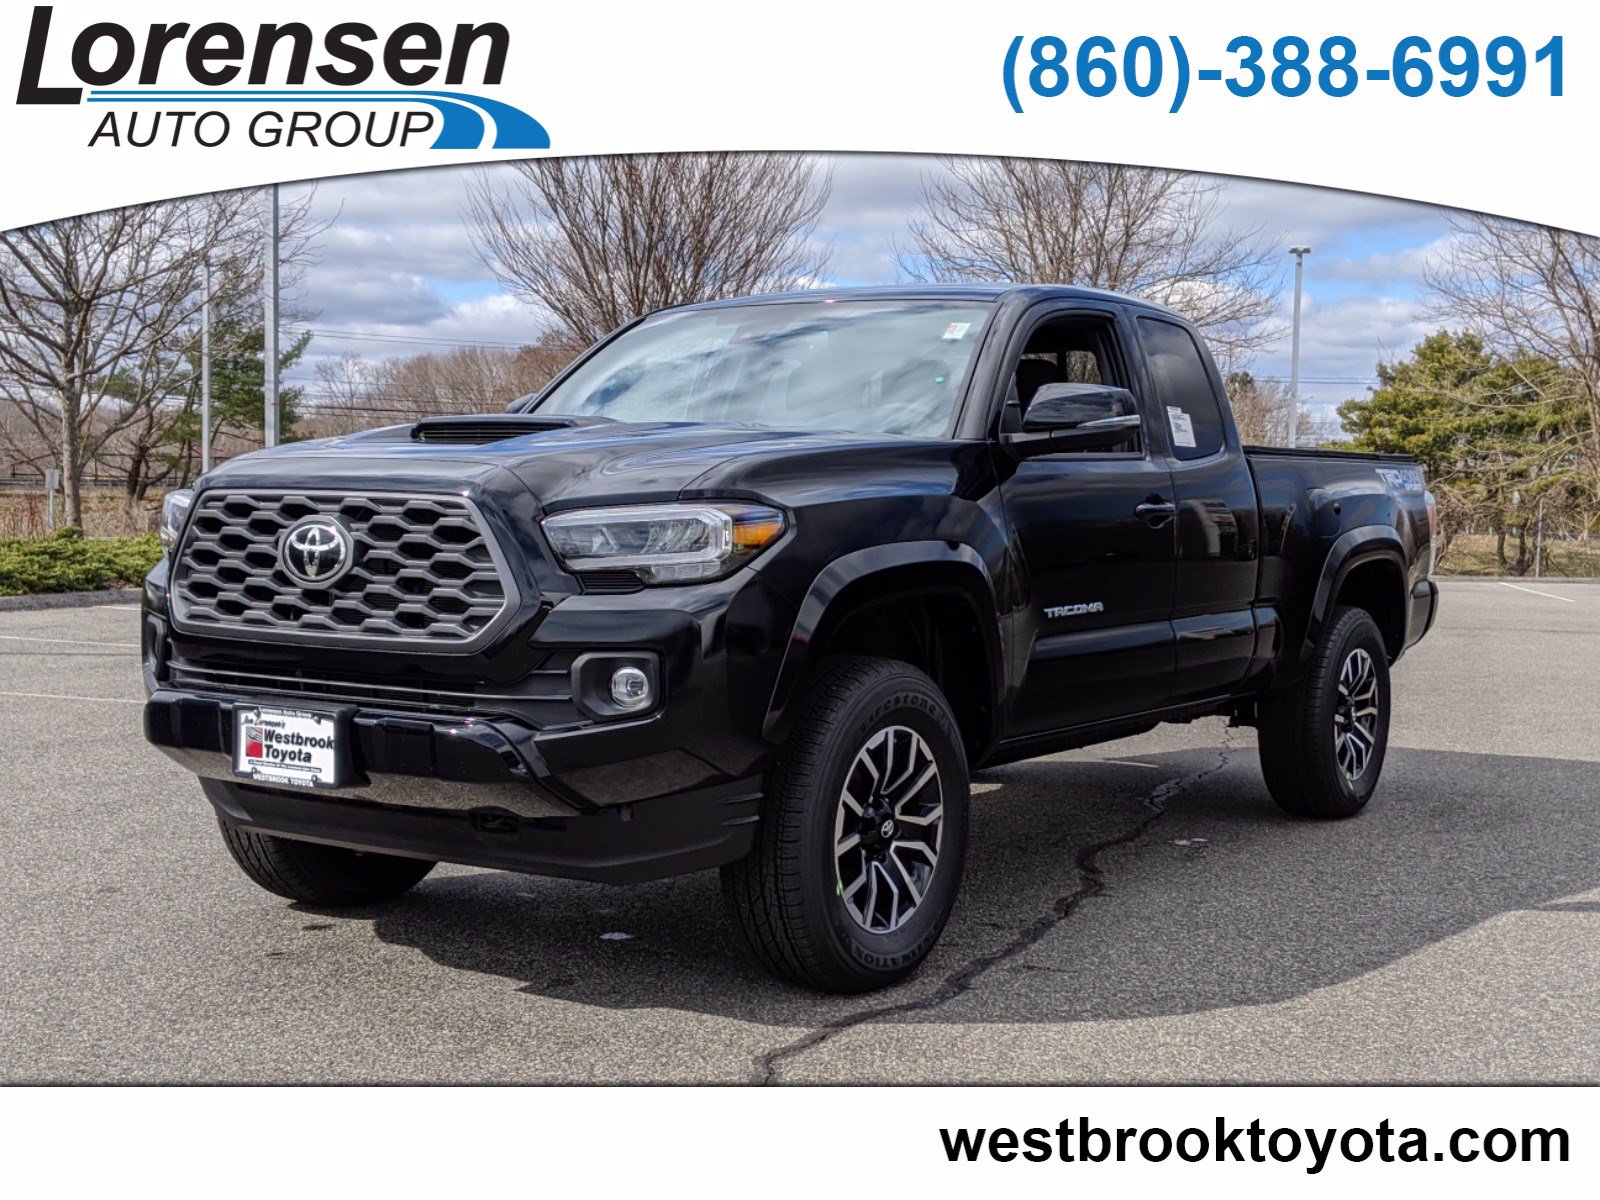 New 2020 Toyota Tacoma Trd Sport Access Cab In Westbrook 20356 Lorensen Auto Group